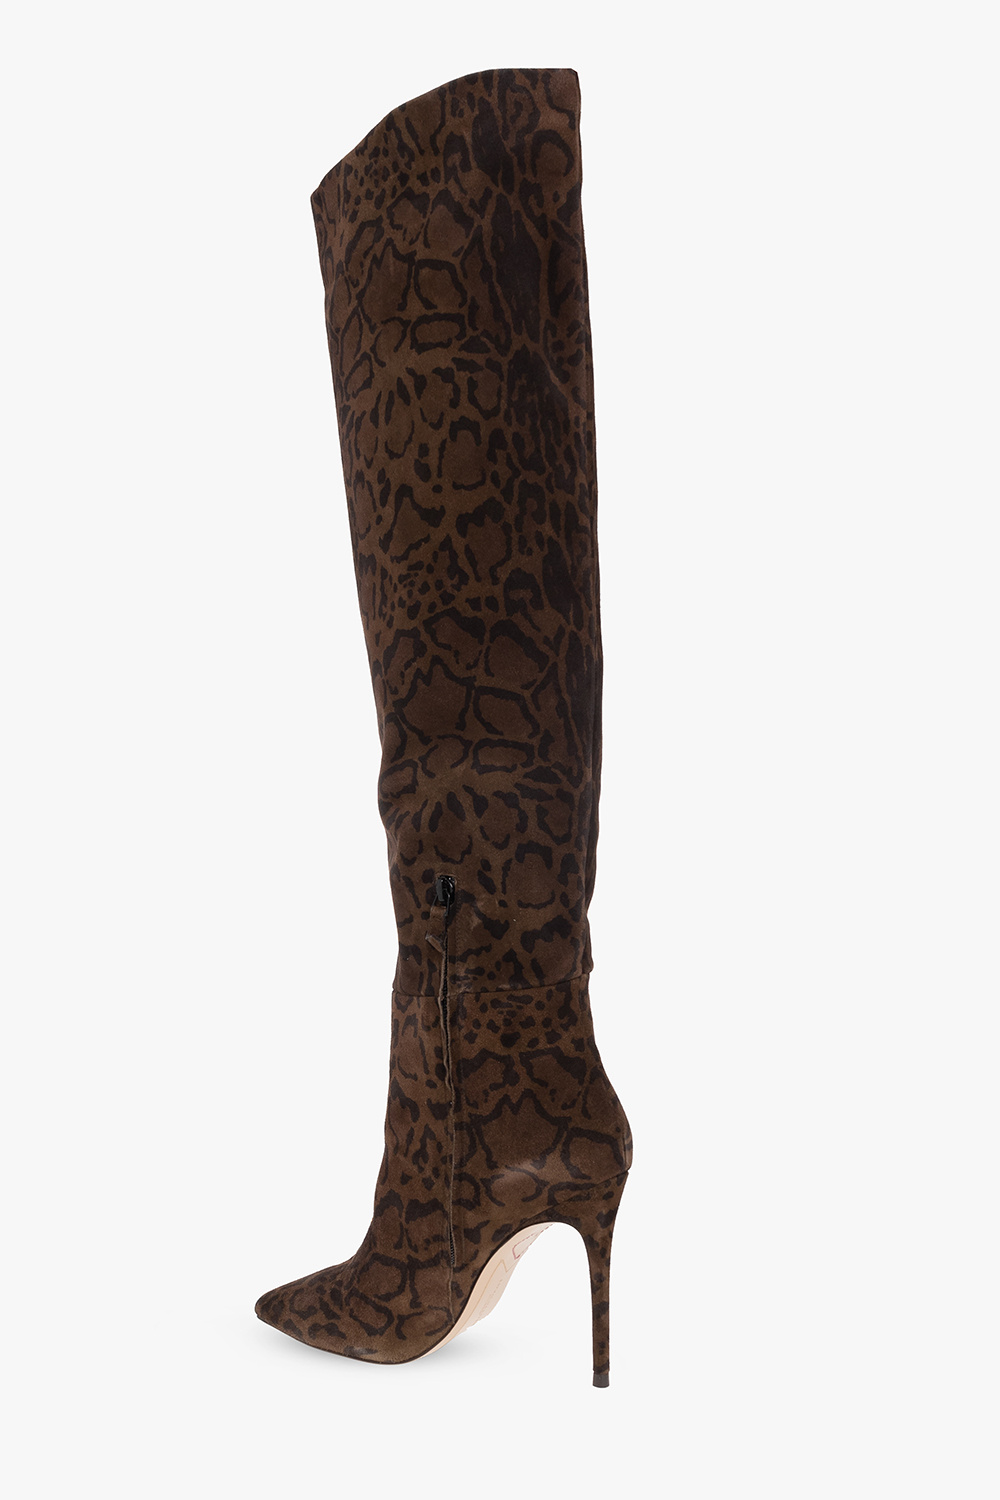 Sophia Webster ‘Mariposa’ heeled over-the-knee boots